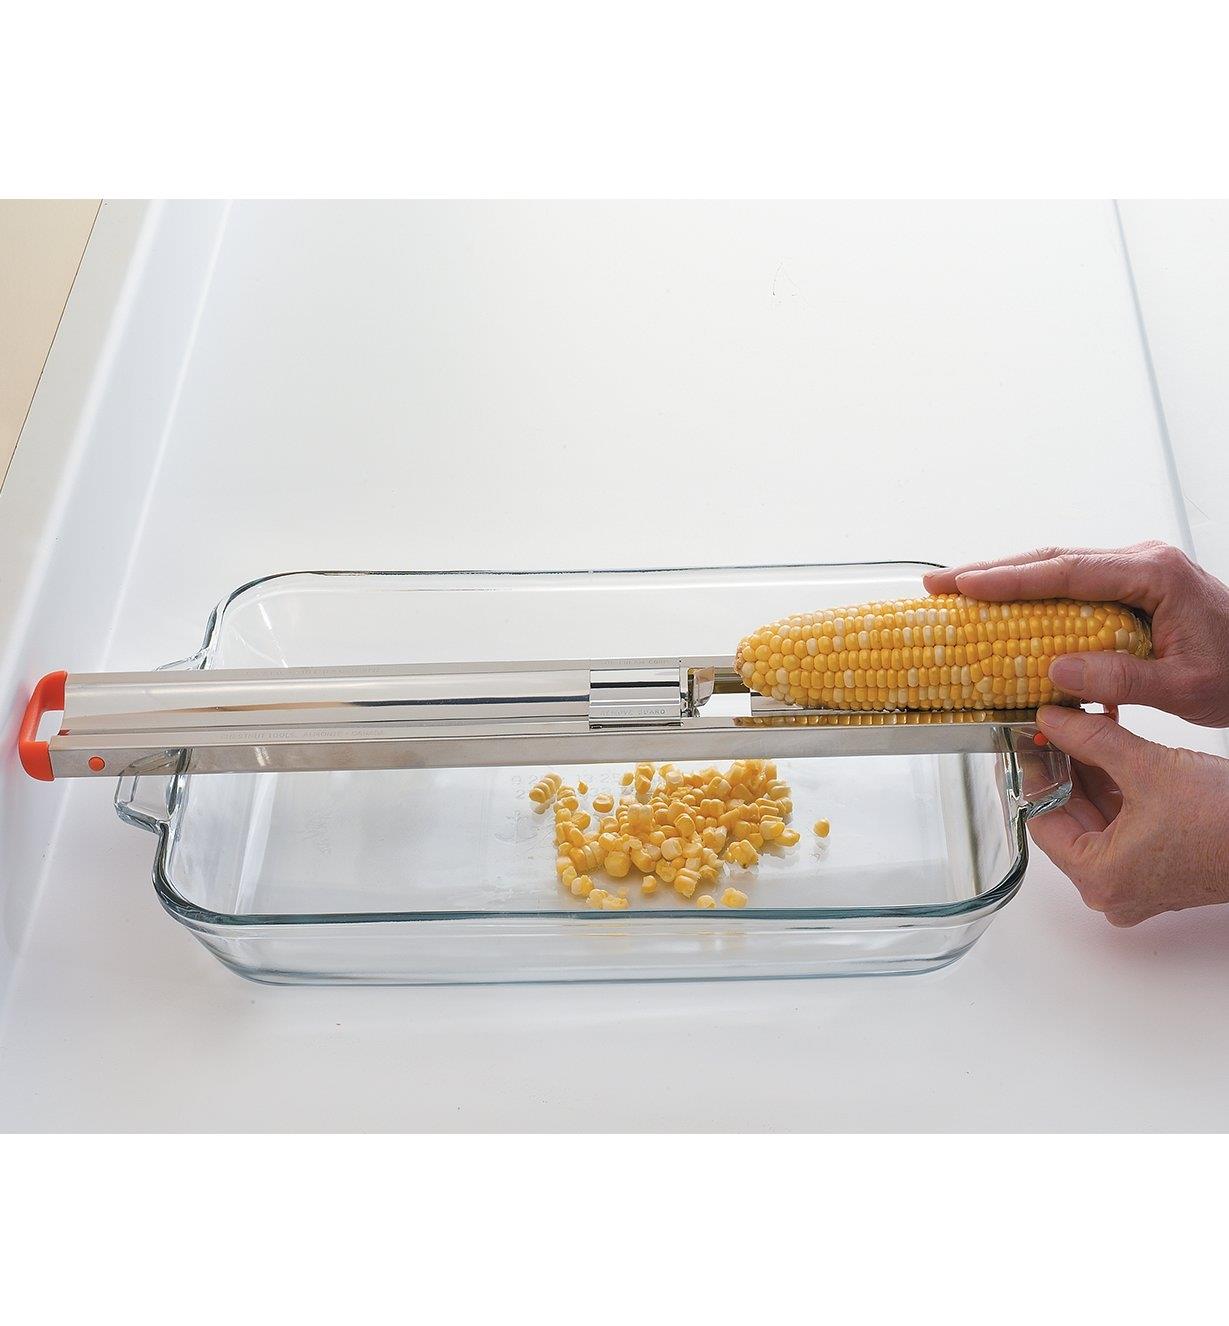 Using the Corn Cutter to remove whole kernels from a corn cob